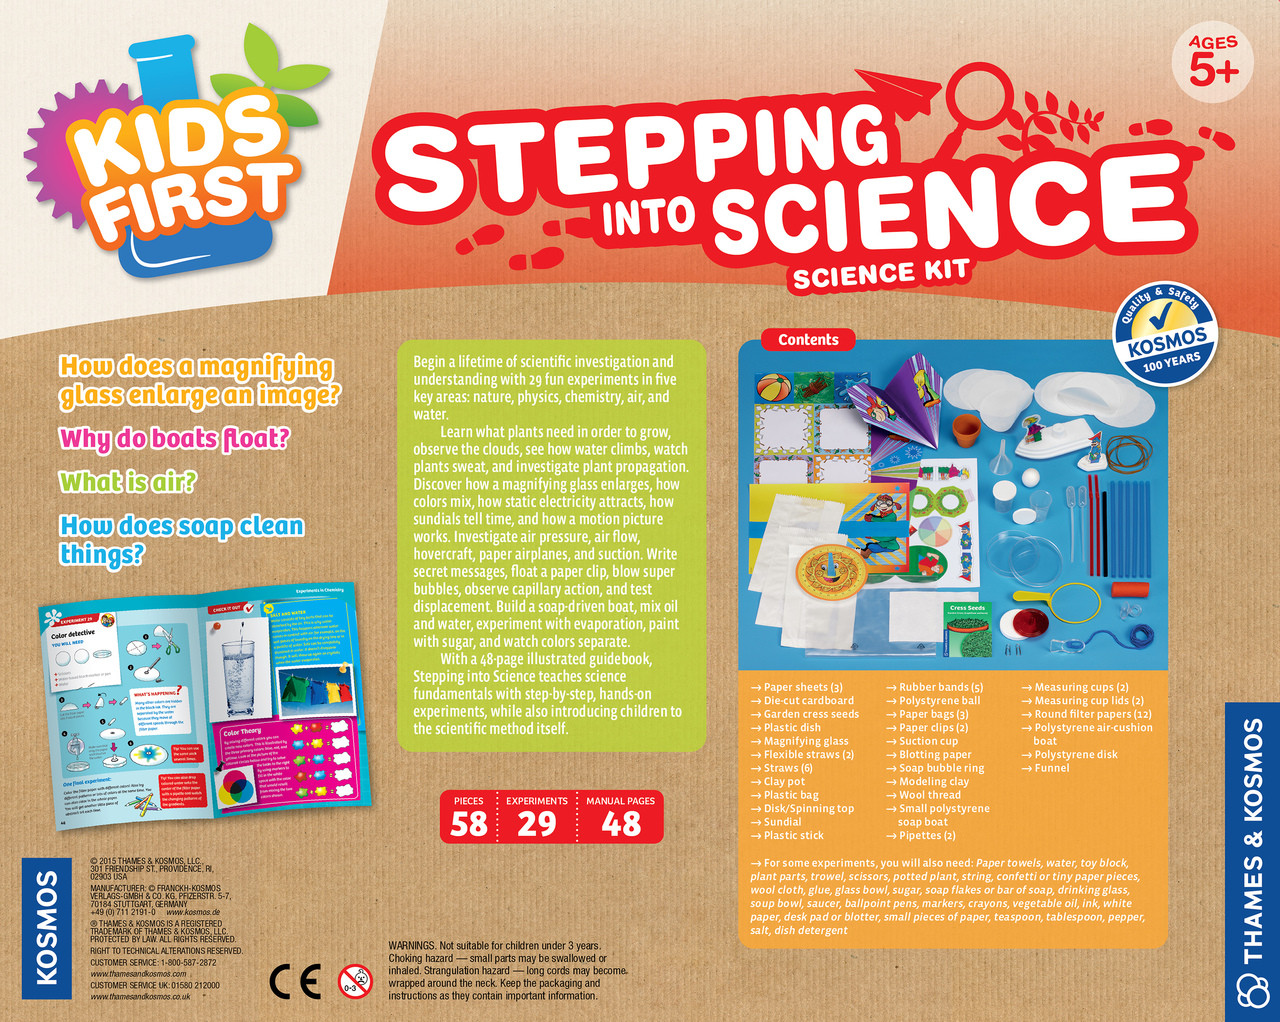 Stepping Into Science: Kids First Science Kit REVIEW – The Art Kit